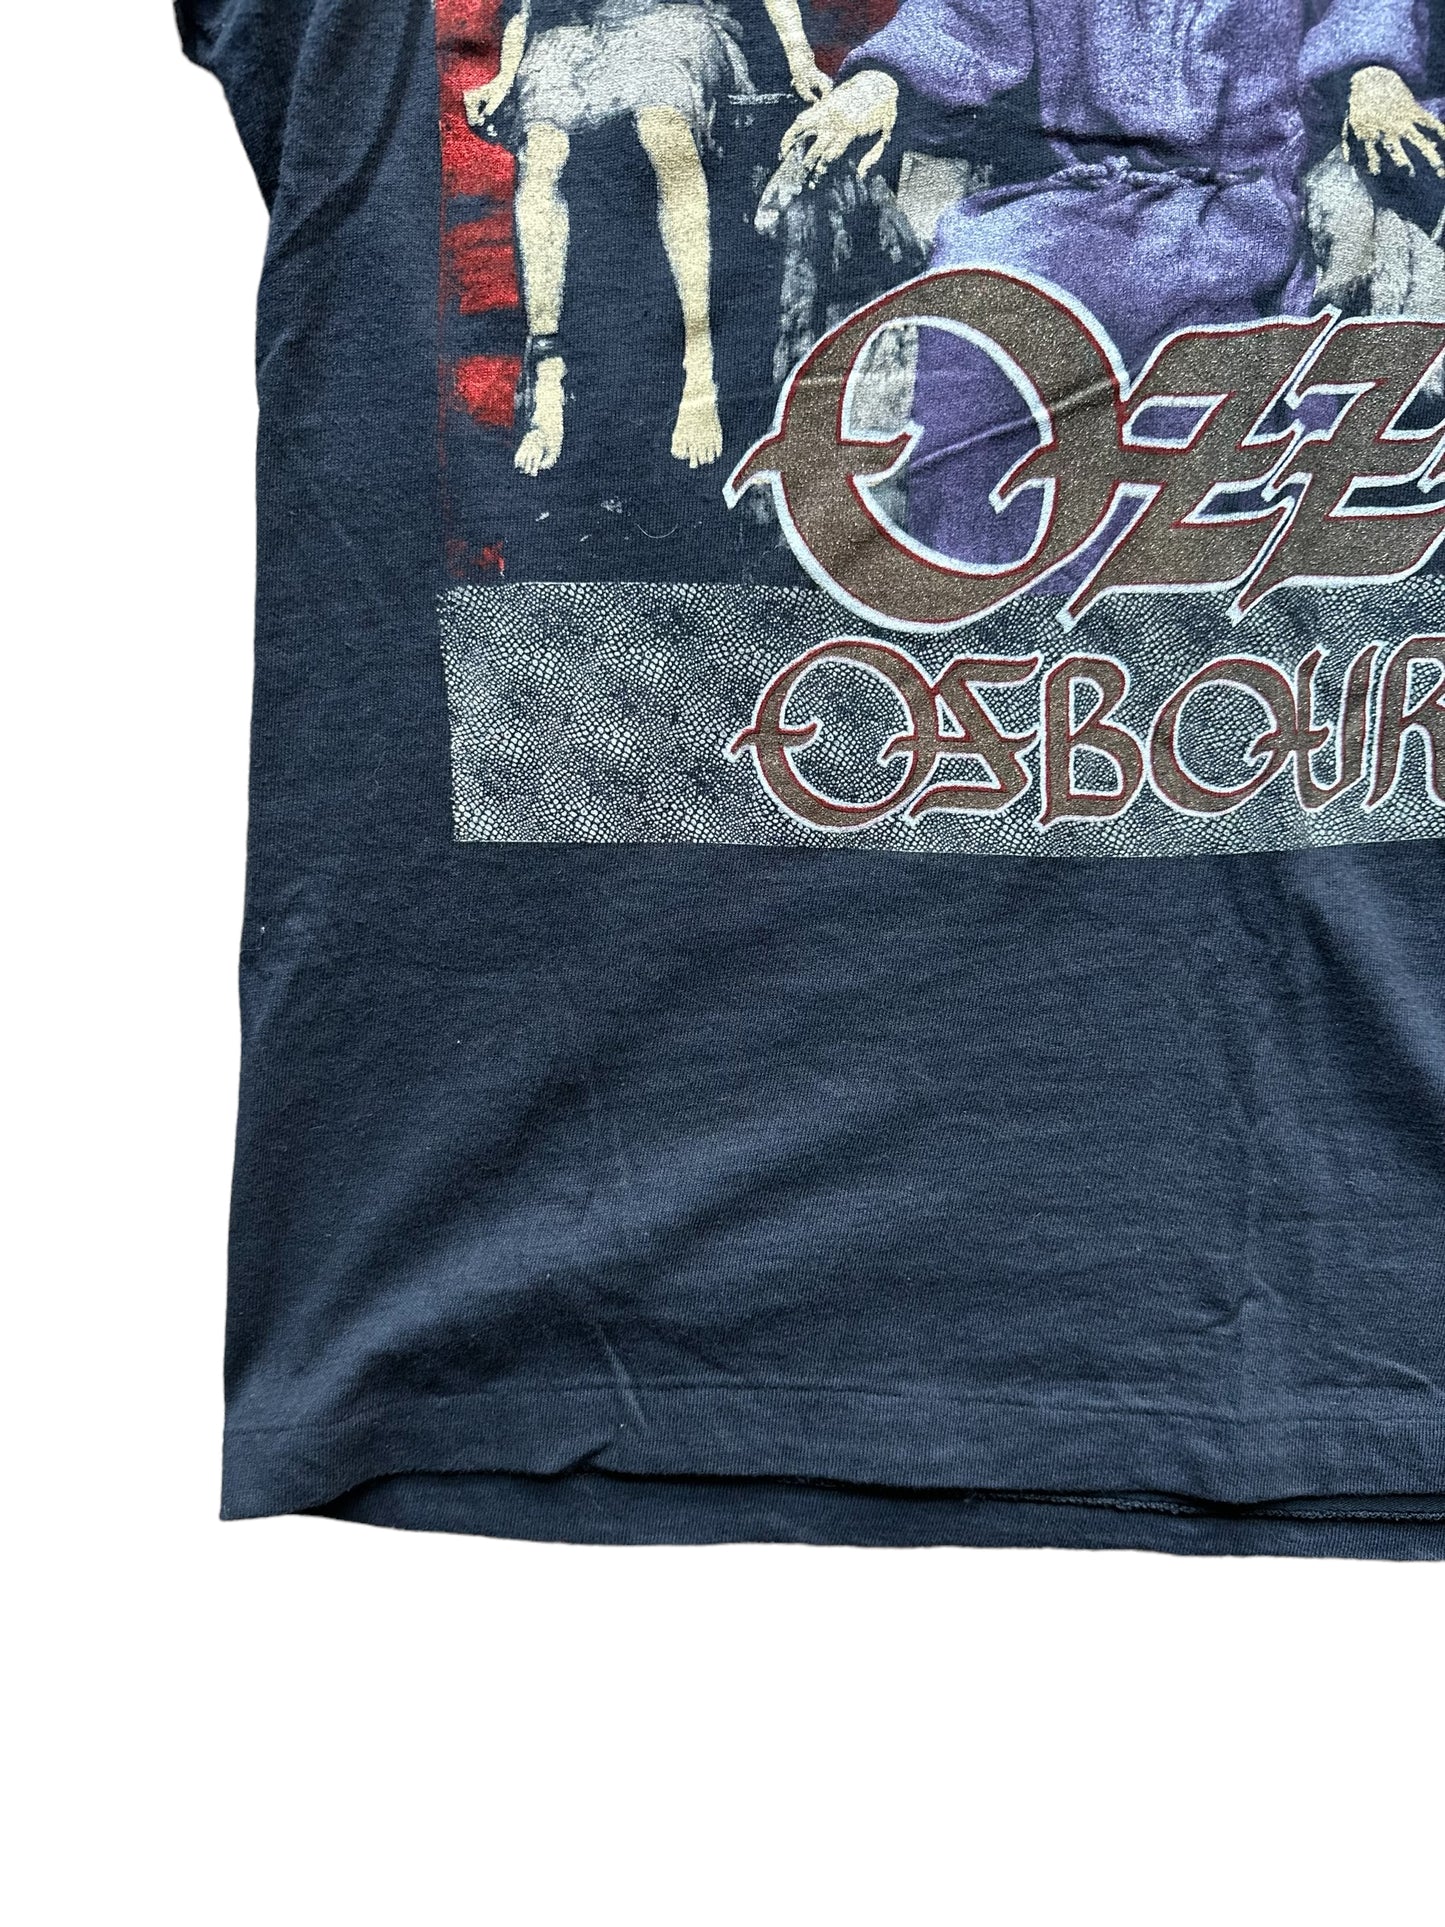 Lower Right Hem View on Vintage Ozzy Osbourne No Rest For The Wicked Tour Shirt | Vintage Metal Tee Shirt | Barn Owl Vintage Seattle